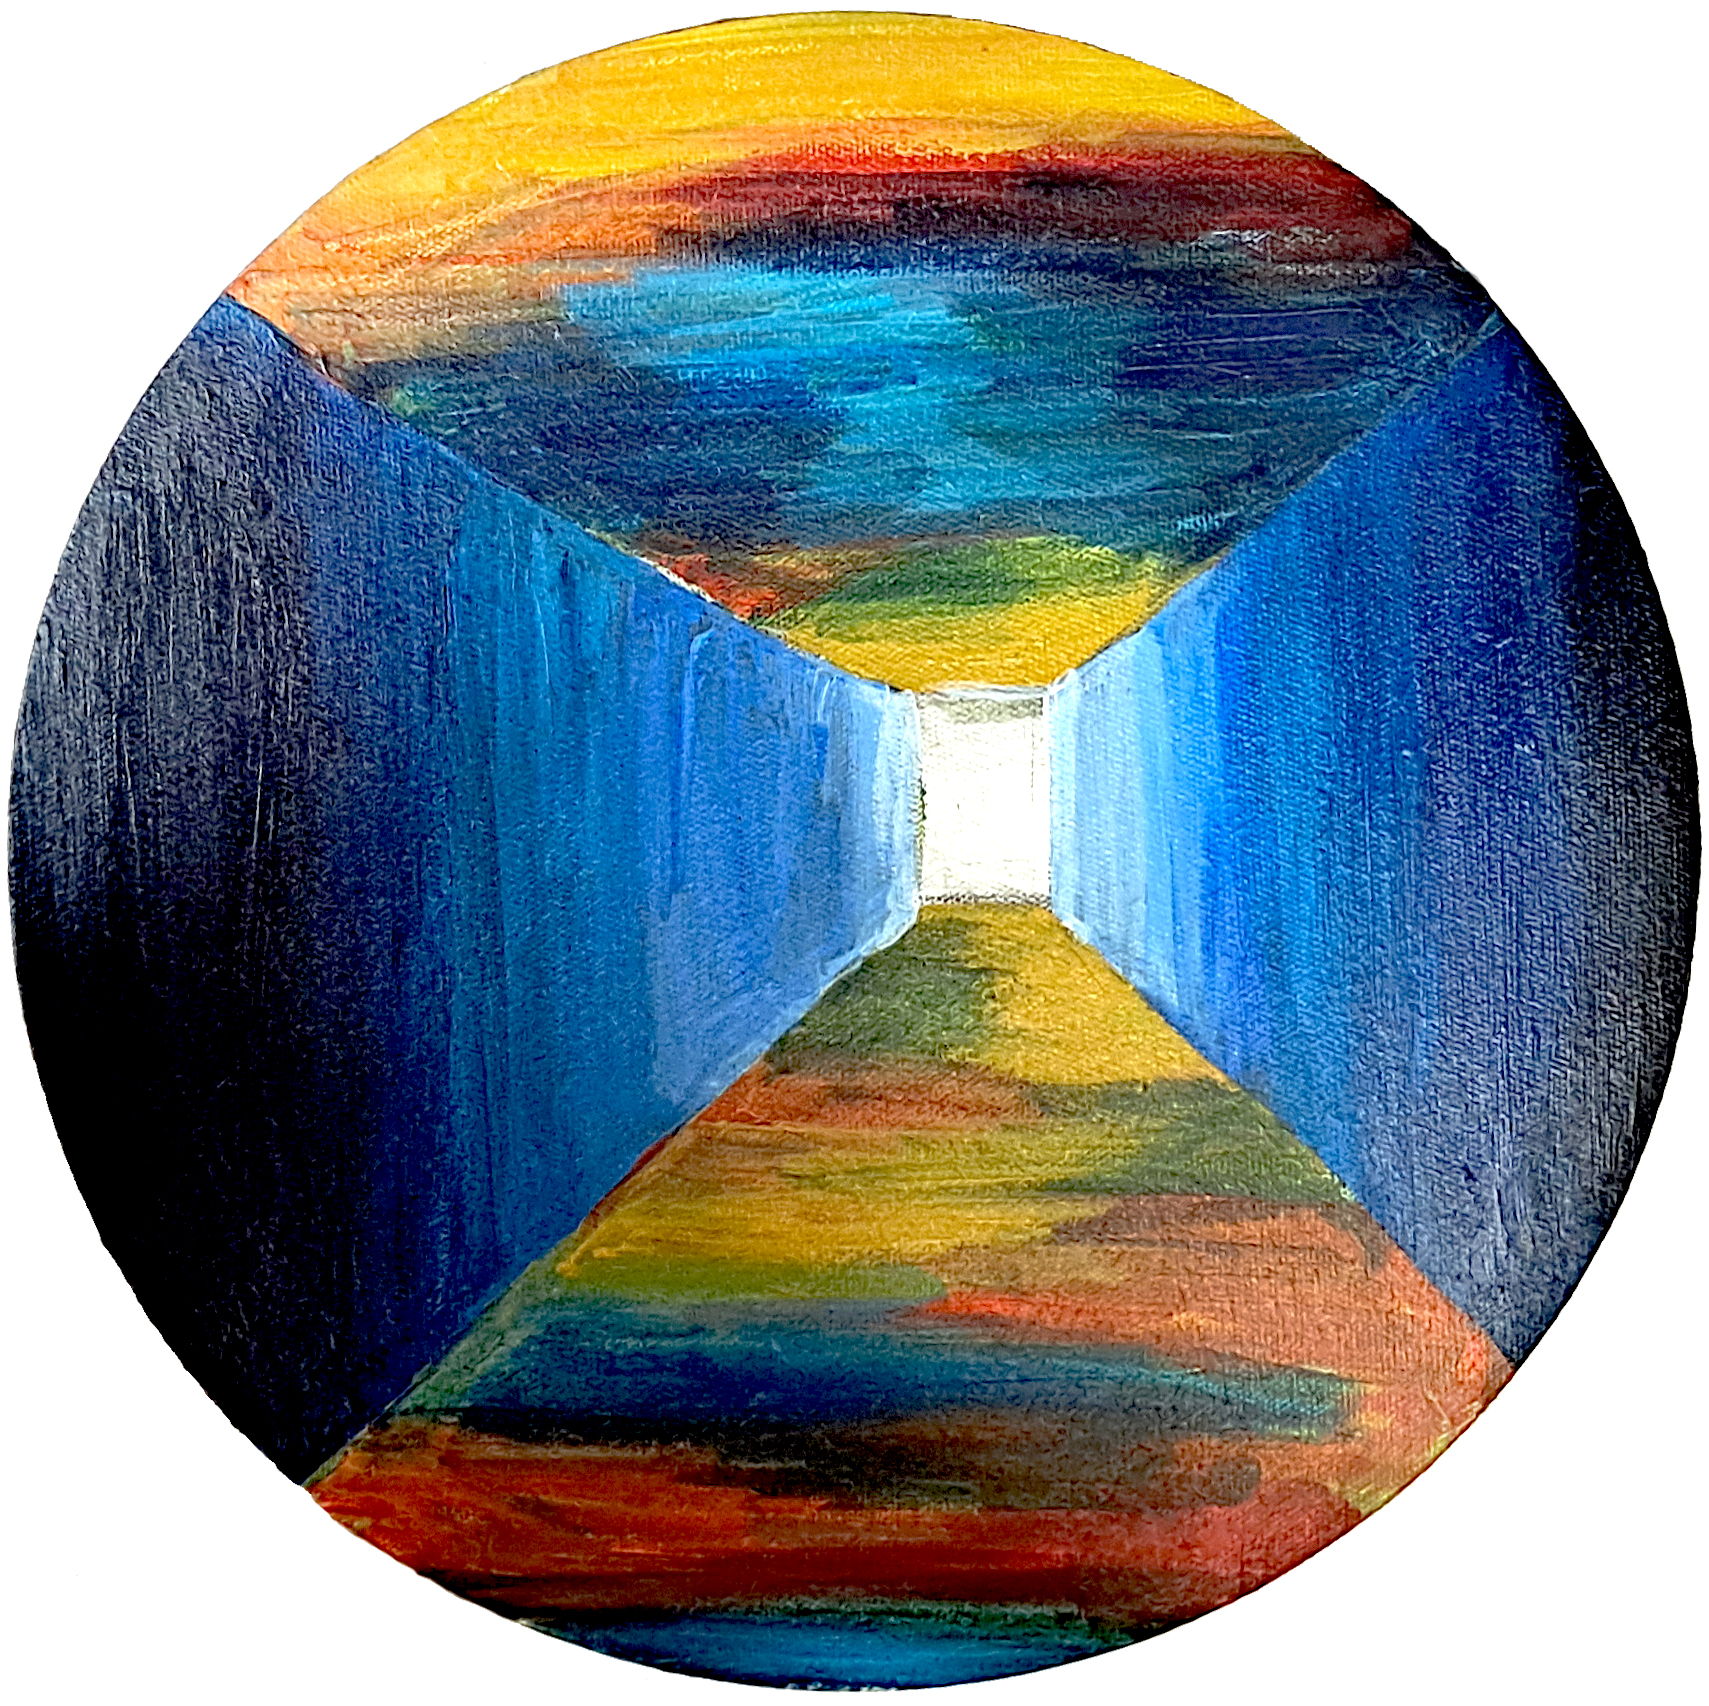 <span style="font-size: 14px; font-family: 'Gilroy' !important;">삽이-정진섭, 터널의 빛 The light of a tunnel, 2021, Acrylic on canvas, 30x30cm</span>